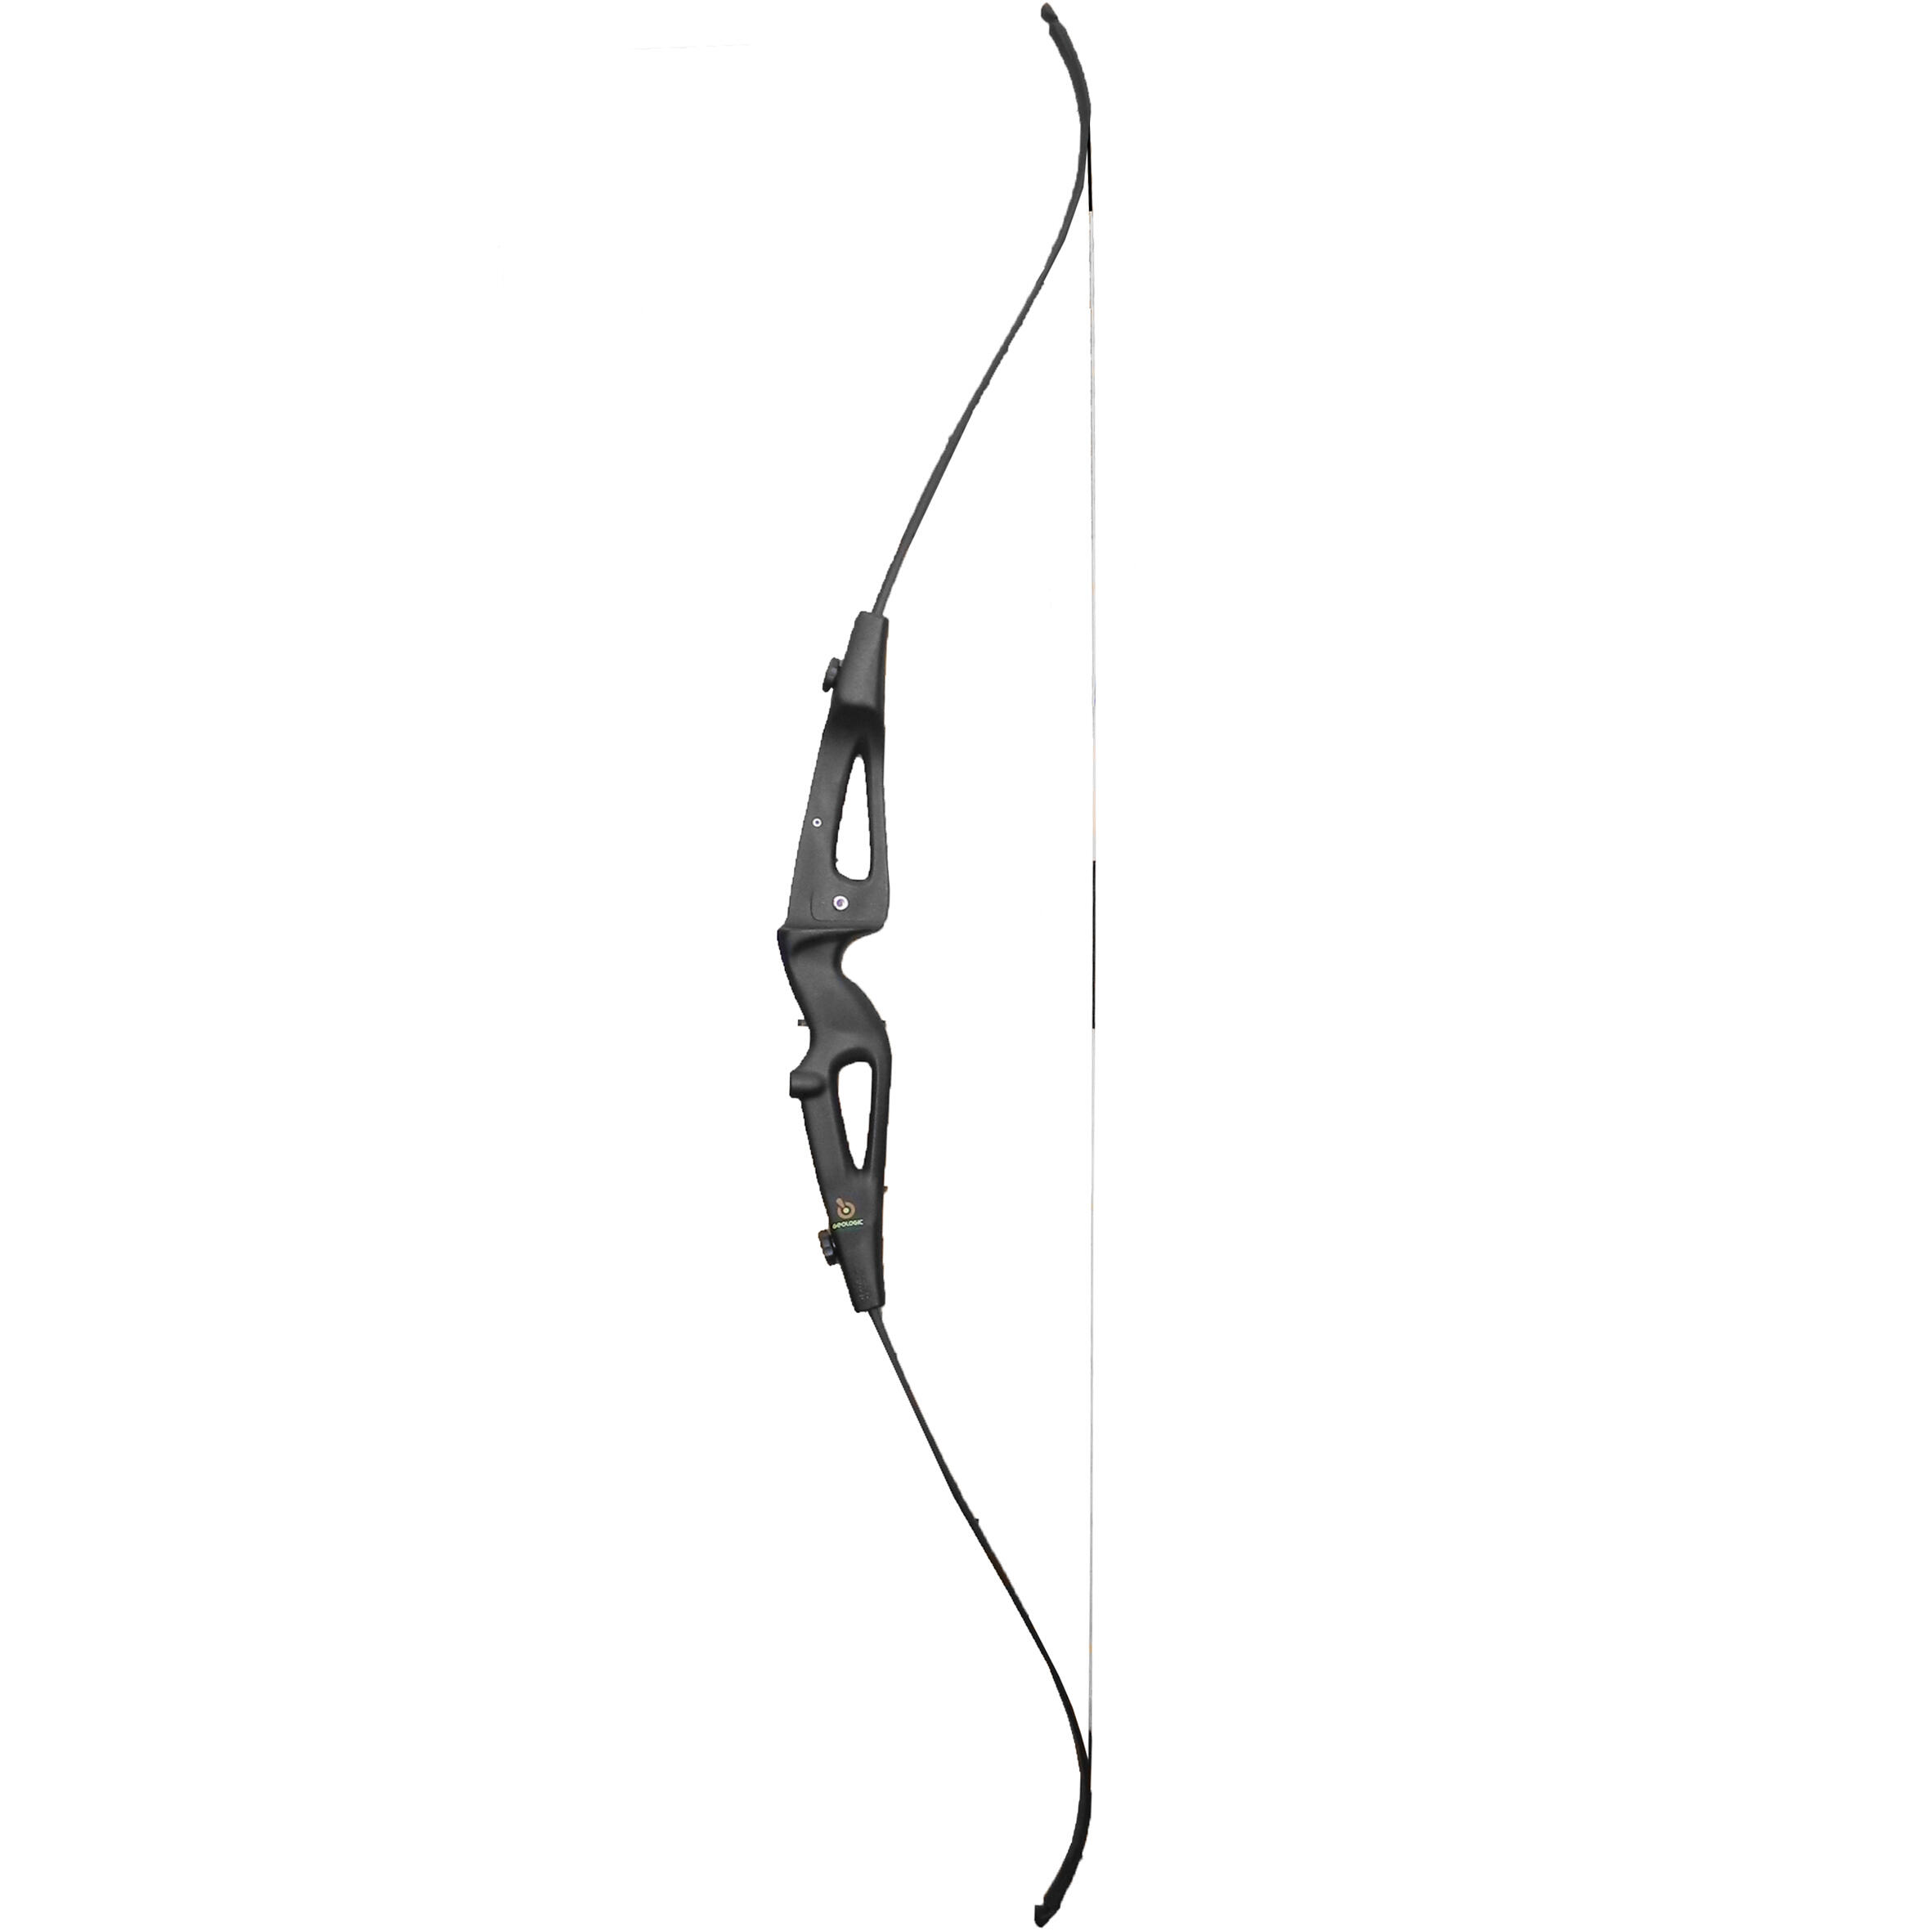 lights out 2 compound bow